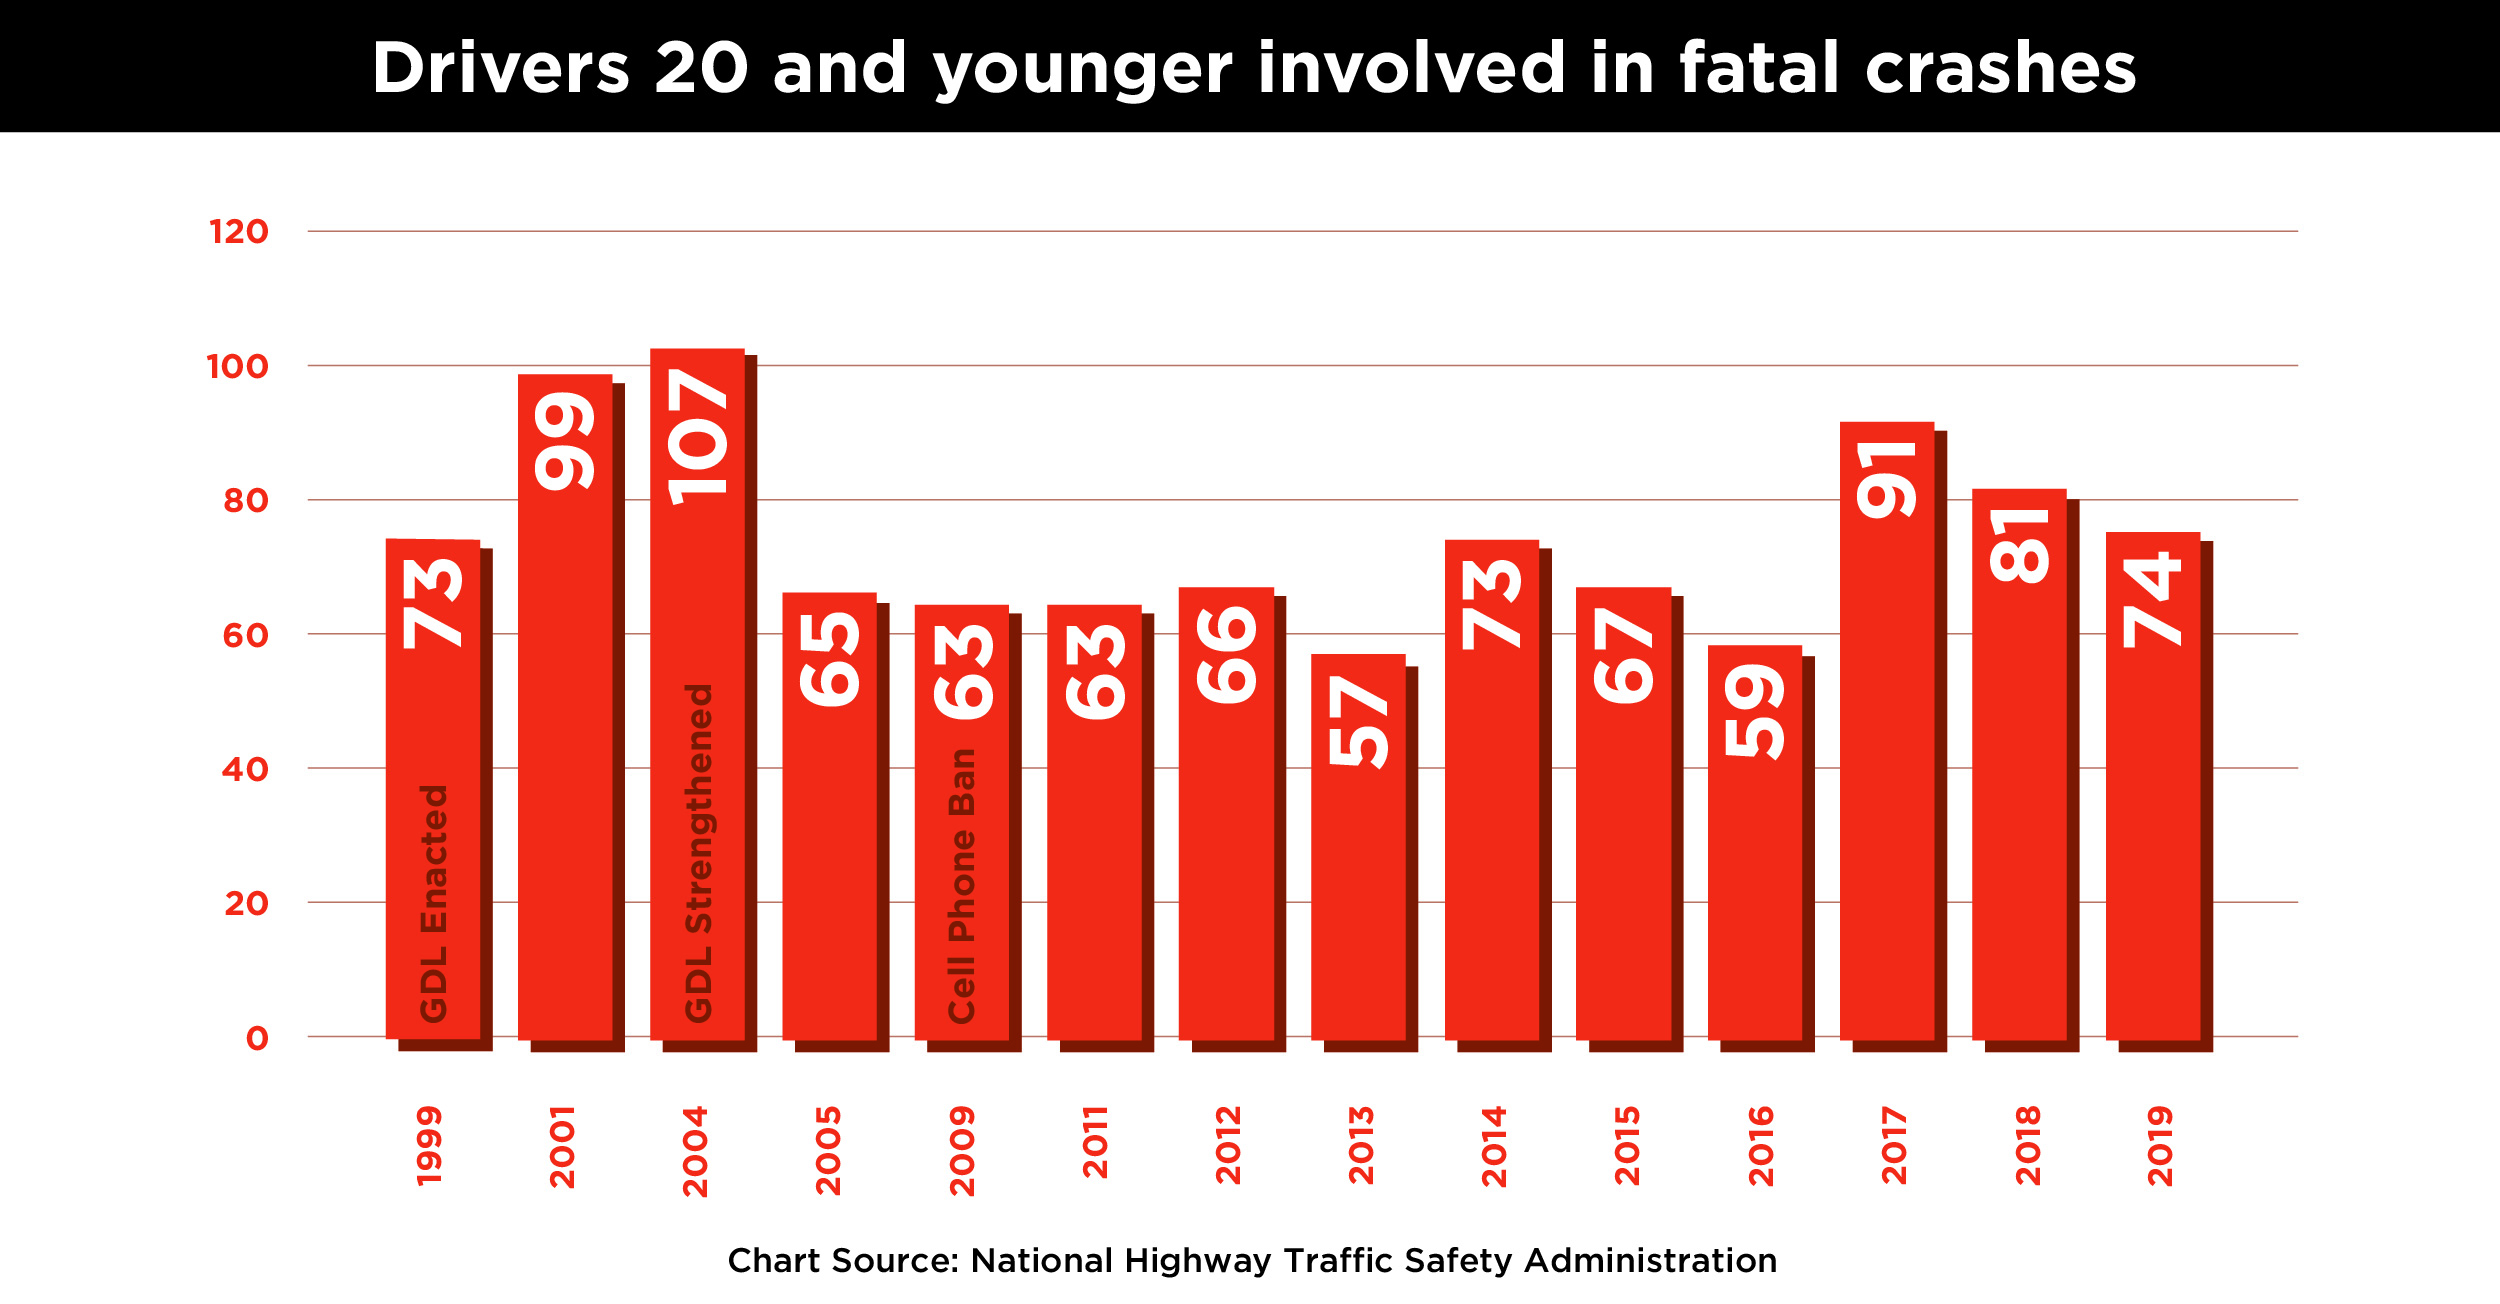 Drivers 20 and younger involved in fatal crashes from 1999 to 2019 detail image